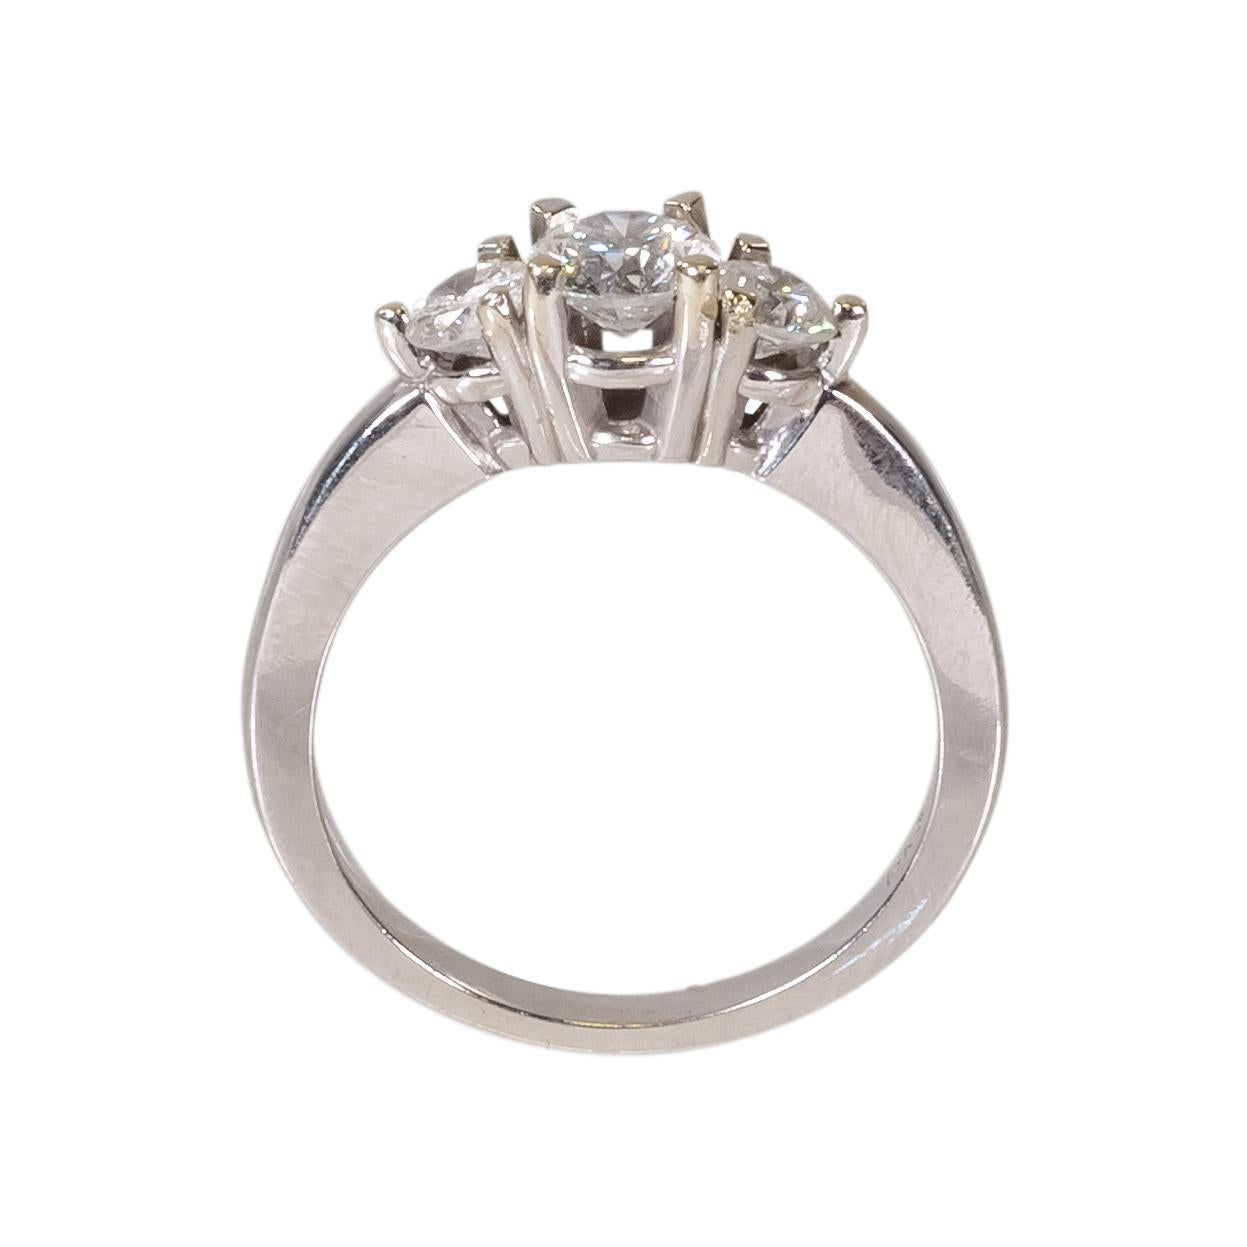 Stunning clarity, three stone diamond and 14 kt white gold ring. 1/2 ct center stone with two 1/4 ct diamonds on the sides total 1 ctw.

PERIOD: After 1950

ORIGIN: United States

SIZE: Size 6.25

Family Owned & Operated
Cisco’s Gallery deals in the